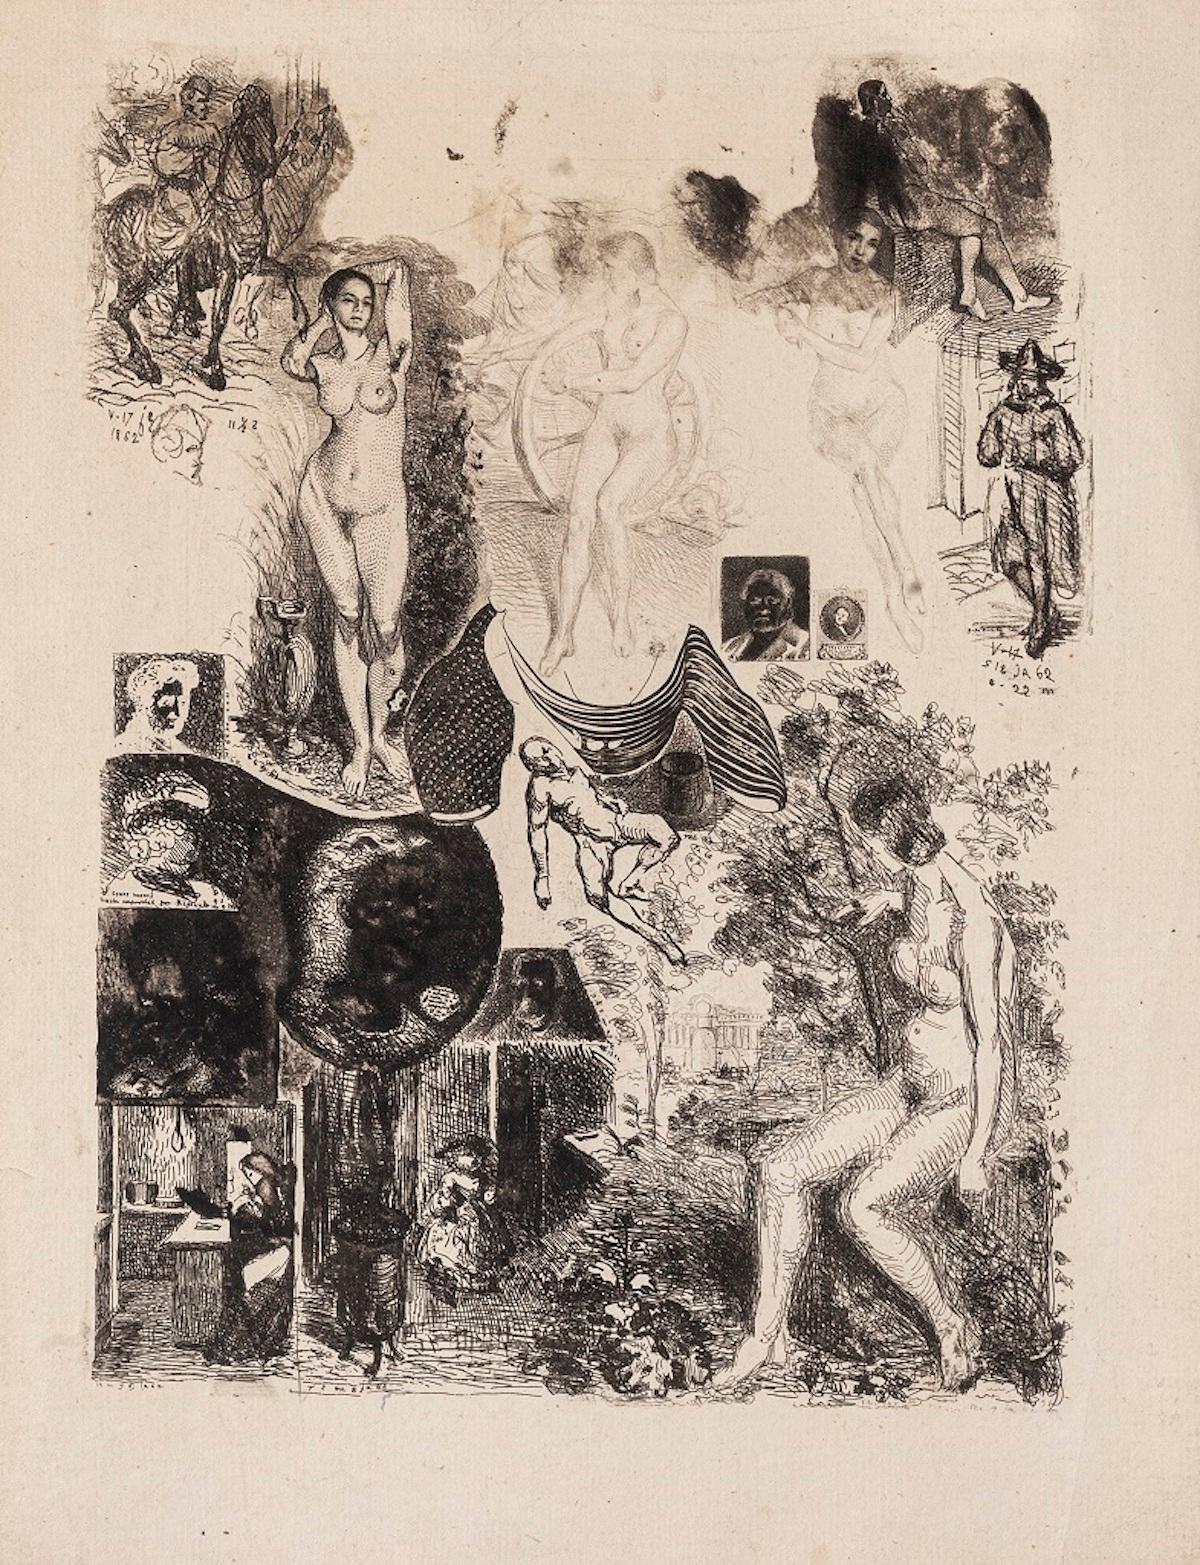 Unknown Figurative Print - Composition with Nudes - Original Etching - 1862